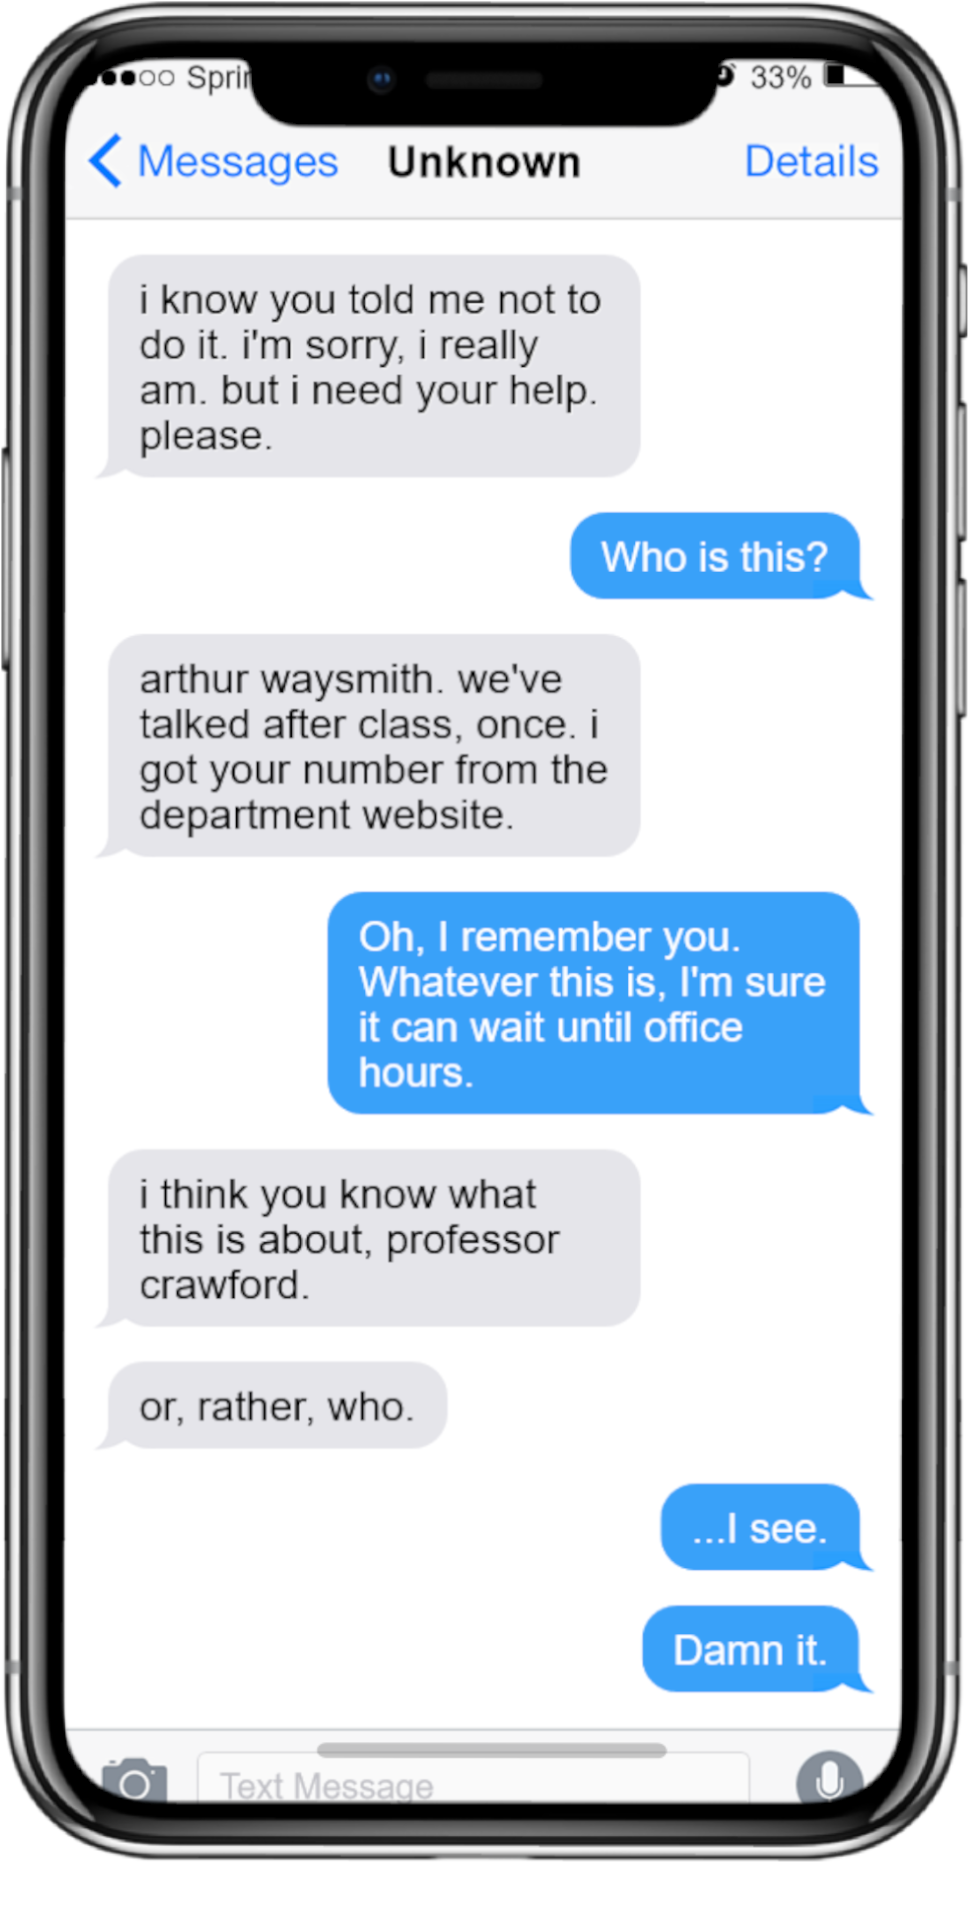 Message Transcript: Entity 1: i know you told me not to do it. i'm sorry, i really am. but i need your help. please. Entity 2: Who is this? Entity 1: arthur waysmith. we've talked after class, once. i got your number from the department website. Entity 2: Oh, I remember you. Whatever this is, I'm sure it can wait until office hours. Entity 1: i think you know what this is about, professor crawford. or, rather, who. Entity 2: ...I see. Damn it.